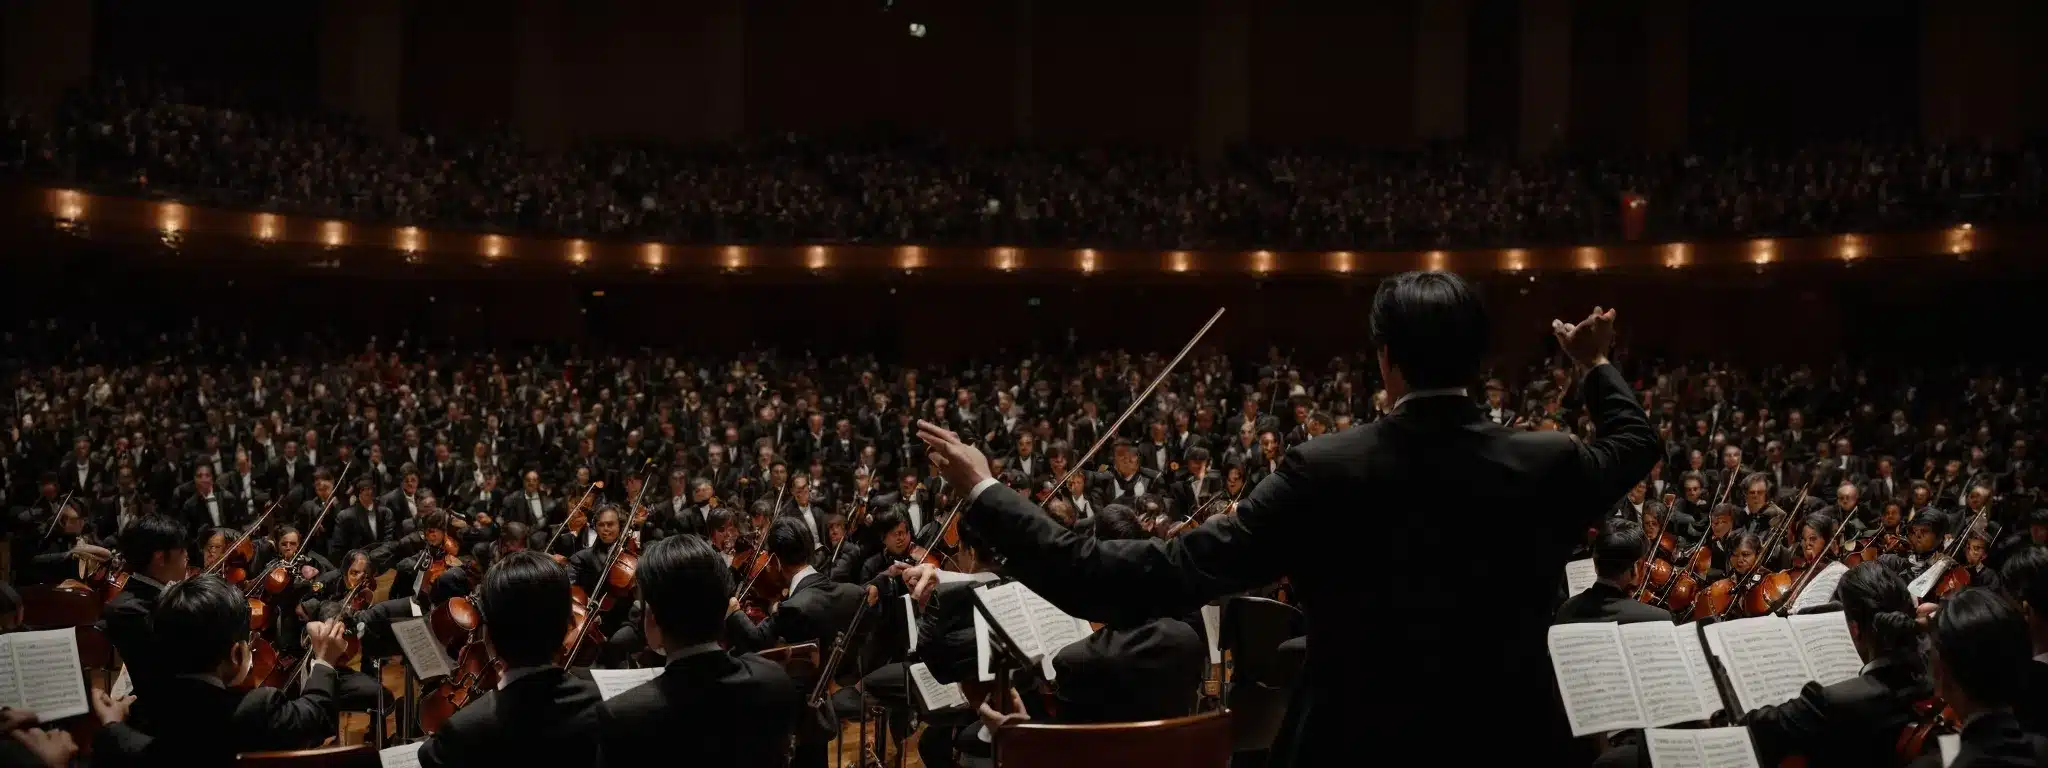 A Conductor Leads An Orchestra On Stage, With Each Musician Deeply Focused On Their Performance.